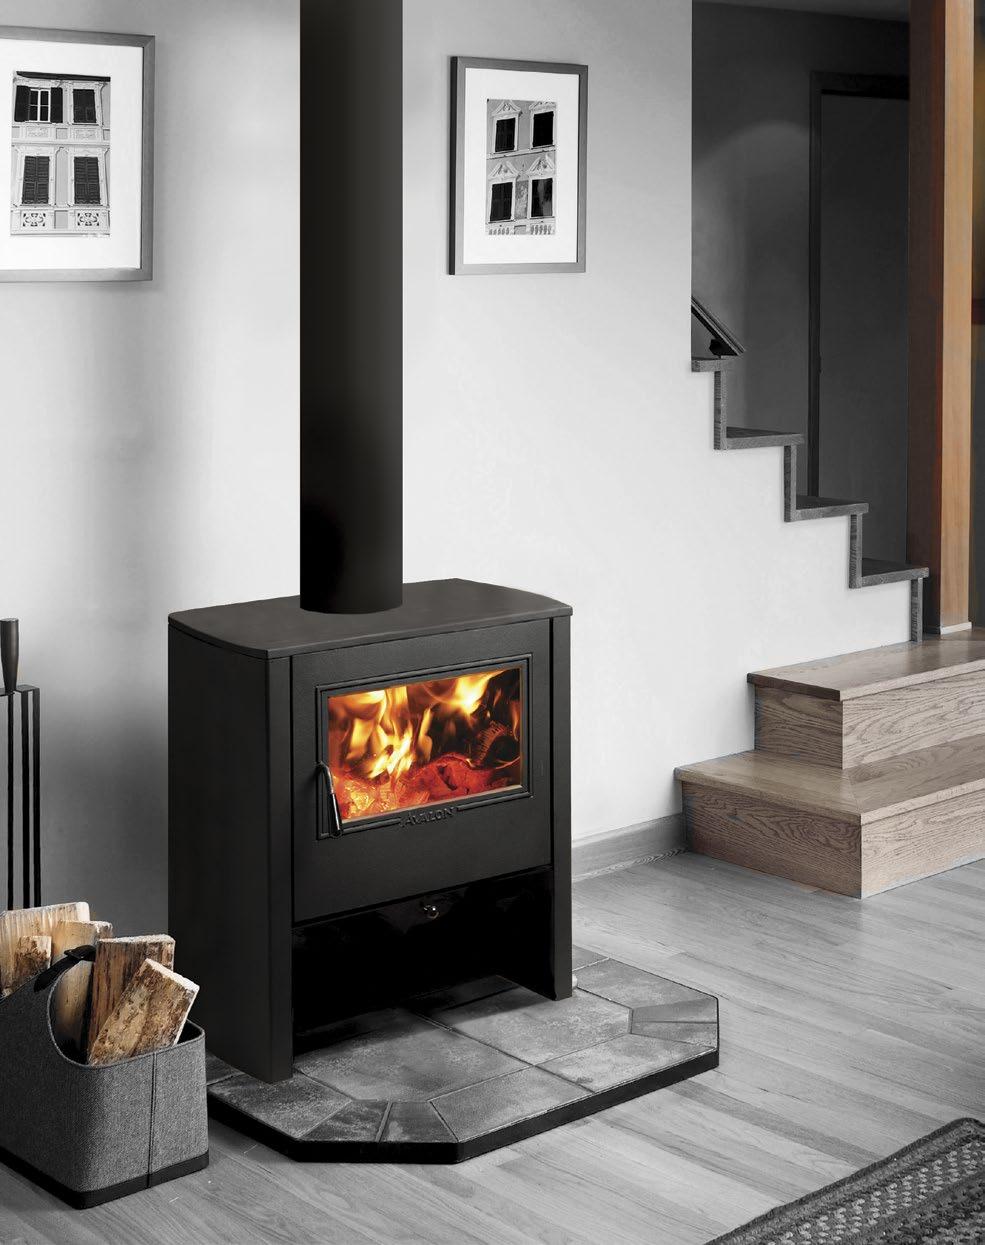 Avalon Camano The Avalon Camano wood heater features clean, sleek design lines which allows for a unique and timeless presentation of fire that lends itself to a wide range of architectural styles